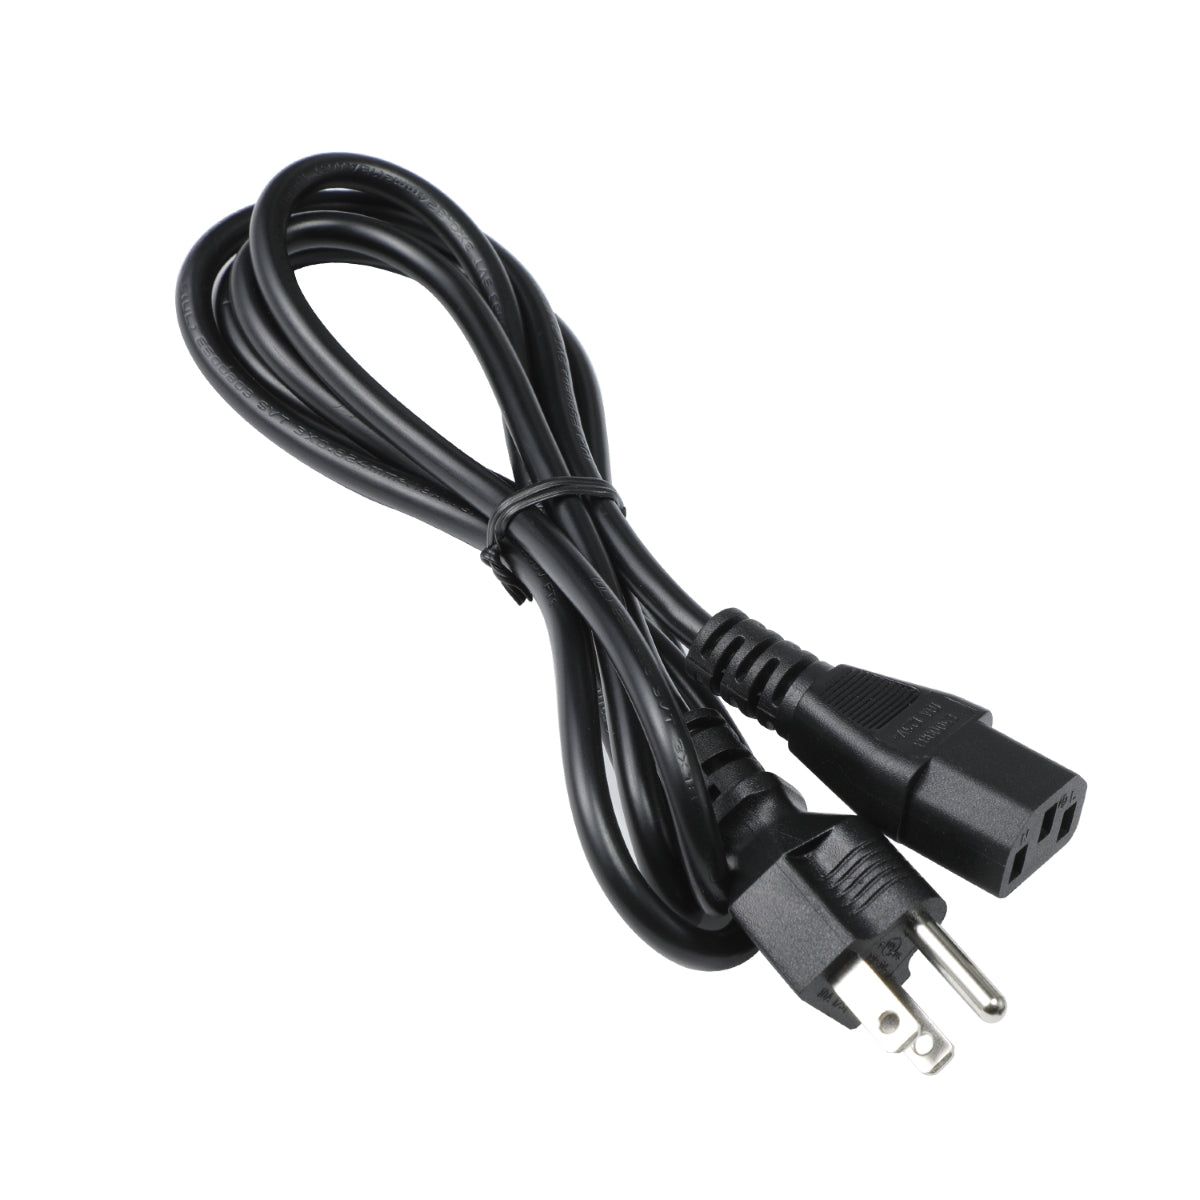 Power Cord for Dell P2815Q Monitor